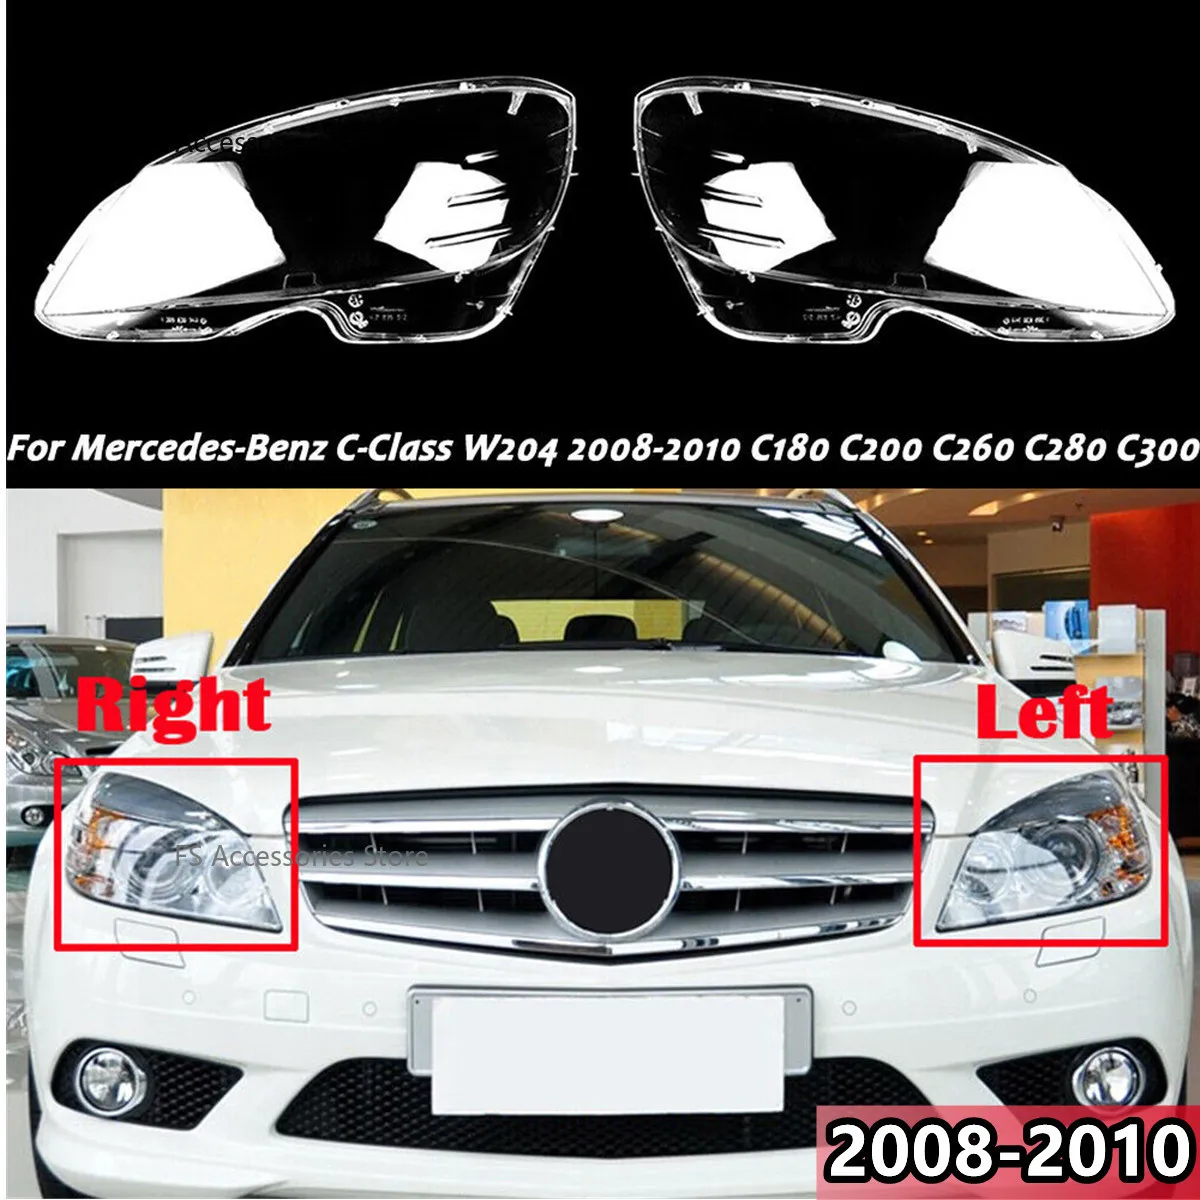 

Right/Left Car Headlight Lens Cover Lampshade Shell For Mercedes-Benz C Class W204 2008-2010 C180 C200 C220 C250 Headlight Cover